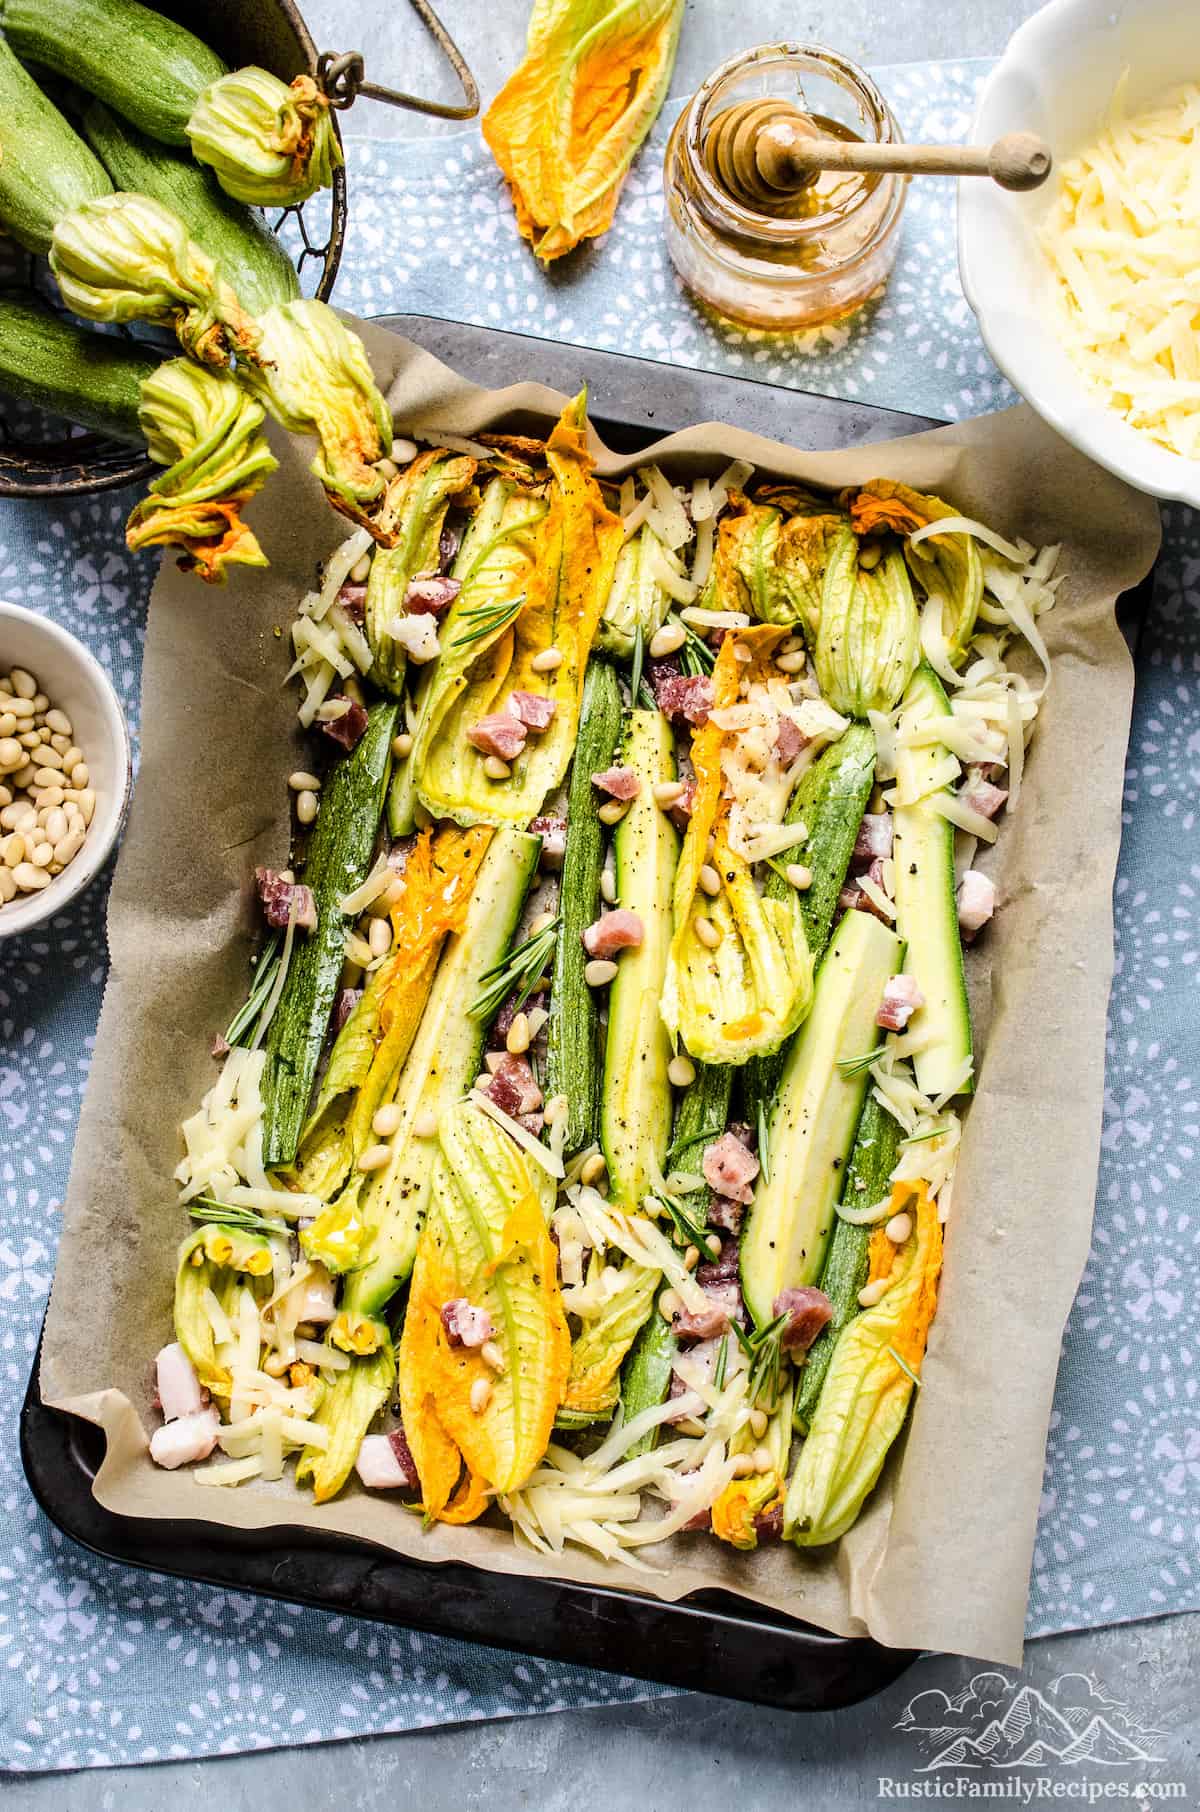 A large rectangular parchment-lined baking pan filled with zucchini strips, zucchini flowers, bacon and pine nuts, surrounded by small bowls holding the ingredients.